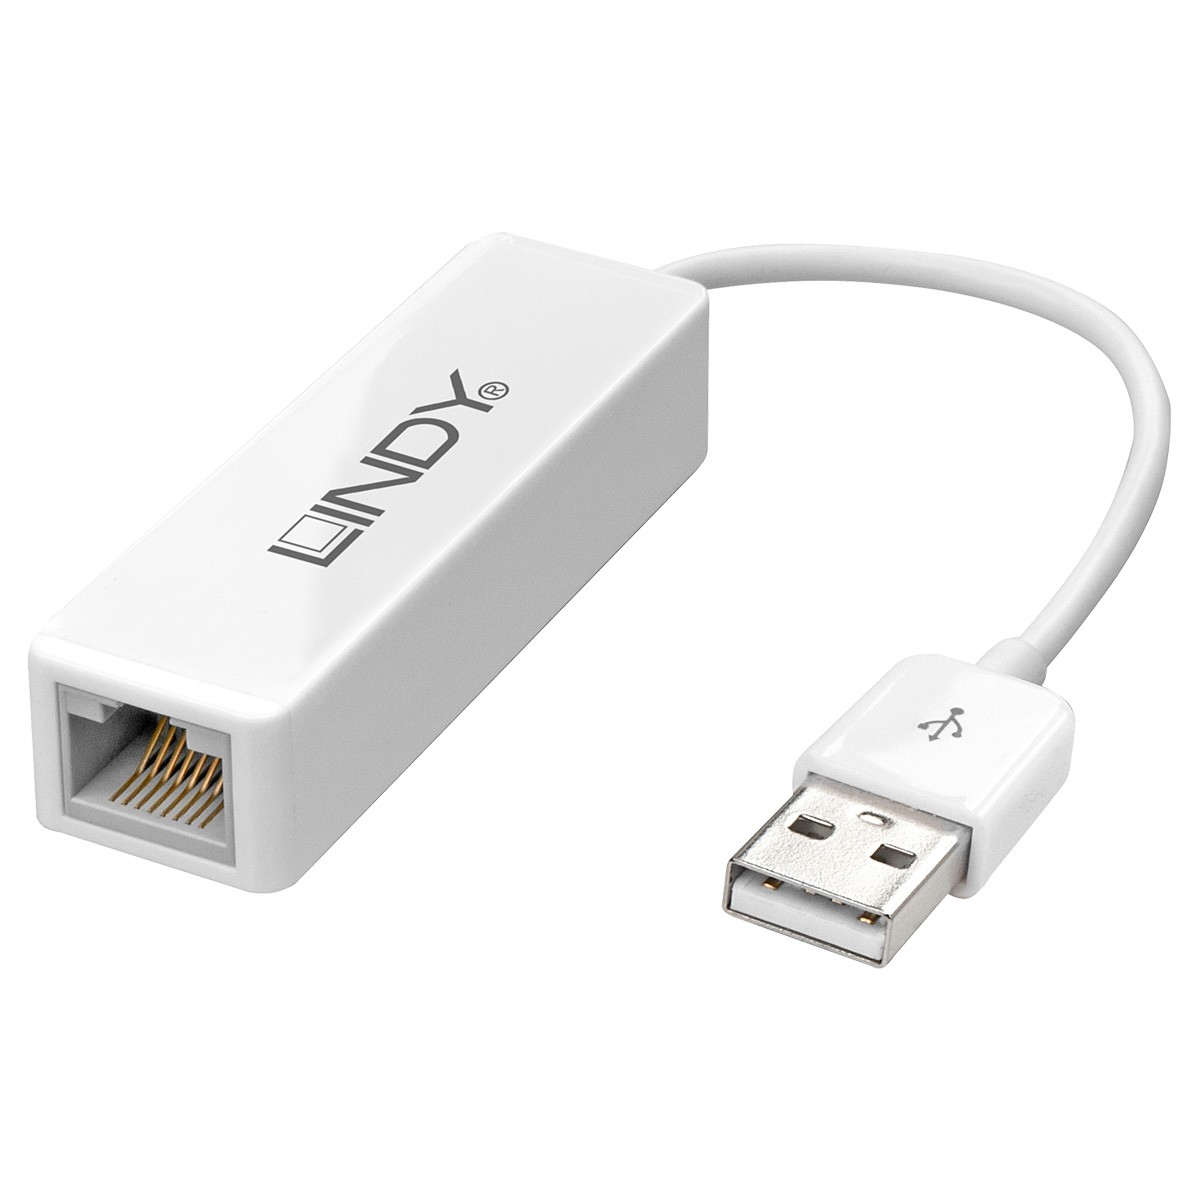 LINDY Male USB-A 2.0 to Female Fast Ethernet RJ45